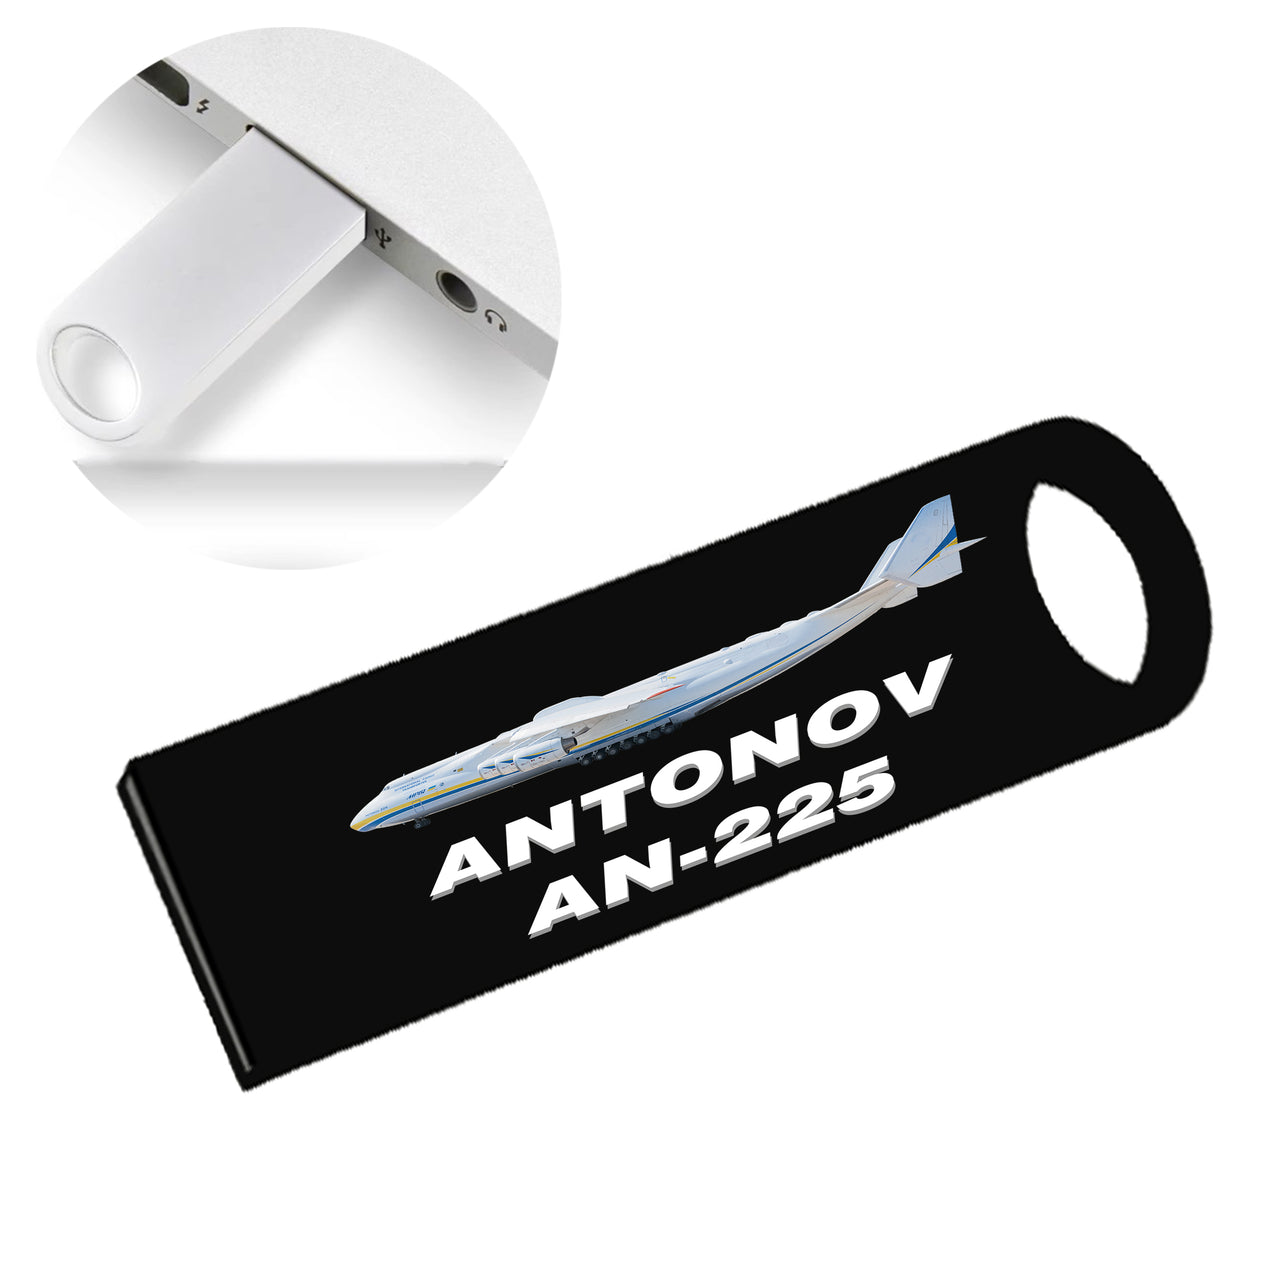 The Antonov AN-225 Designed Waterproof USB Devices